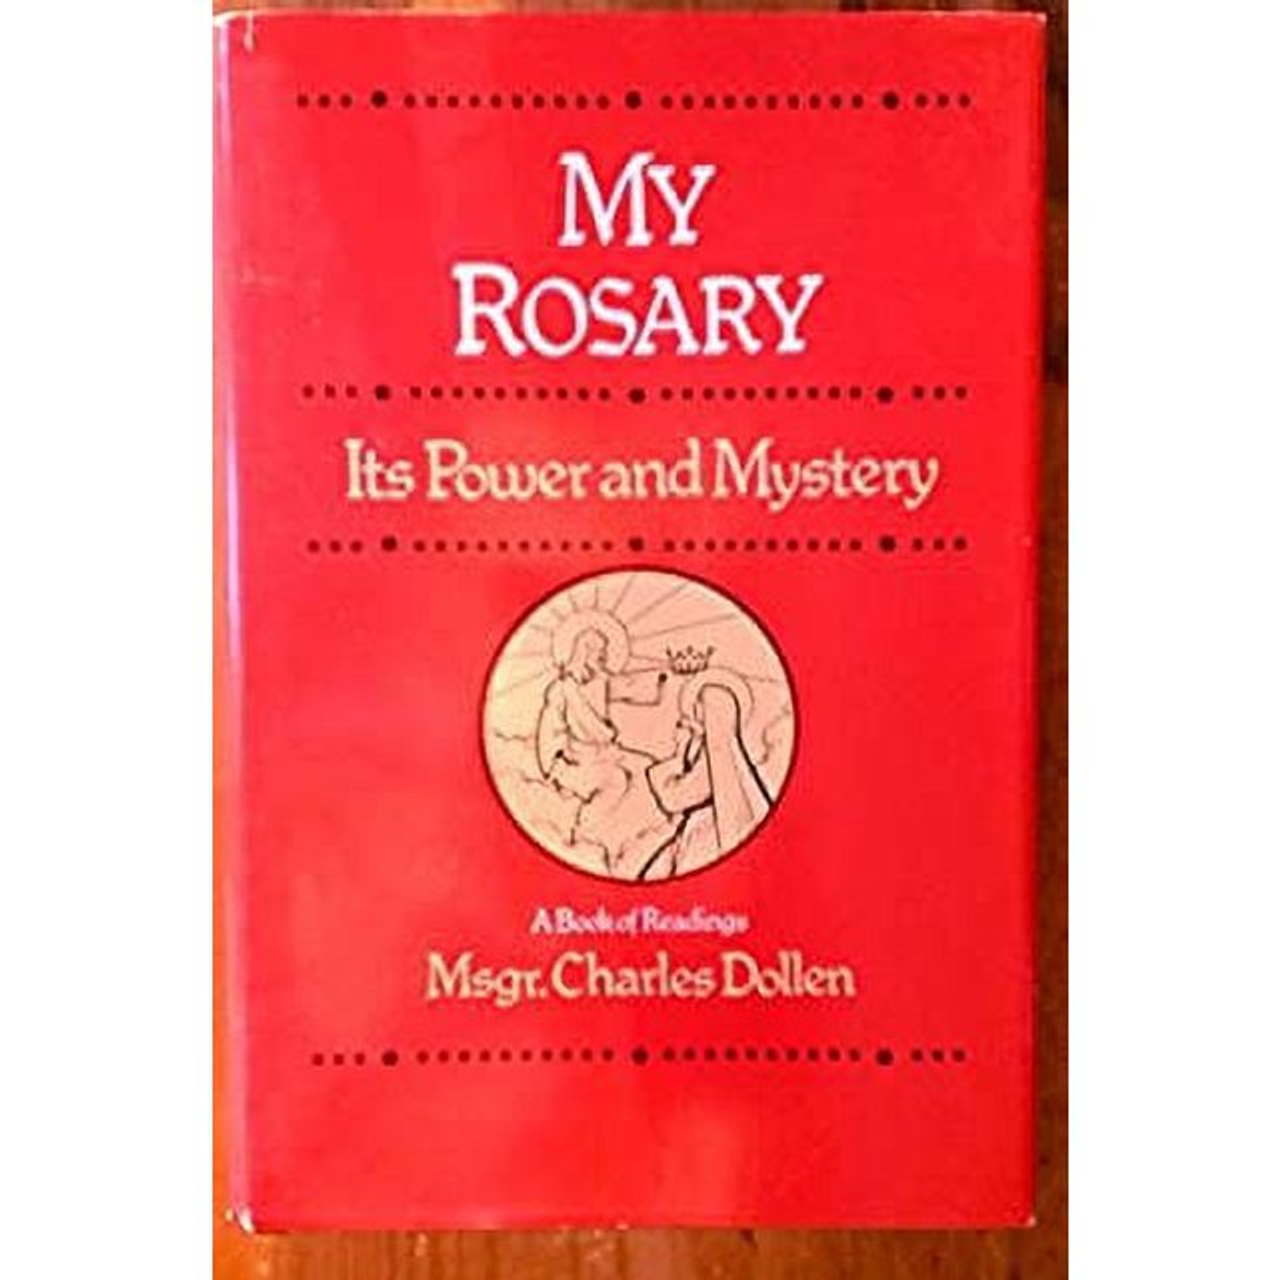 My Rosary Its Power and Mystery by Msgr Charles Dollen